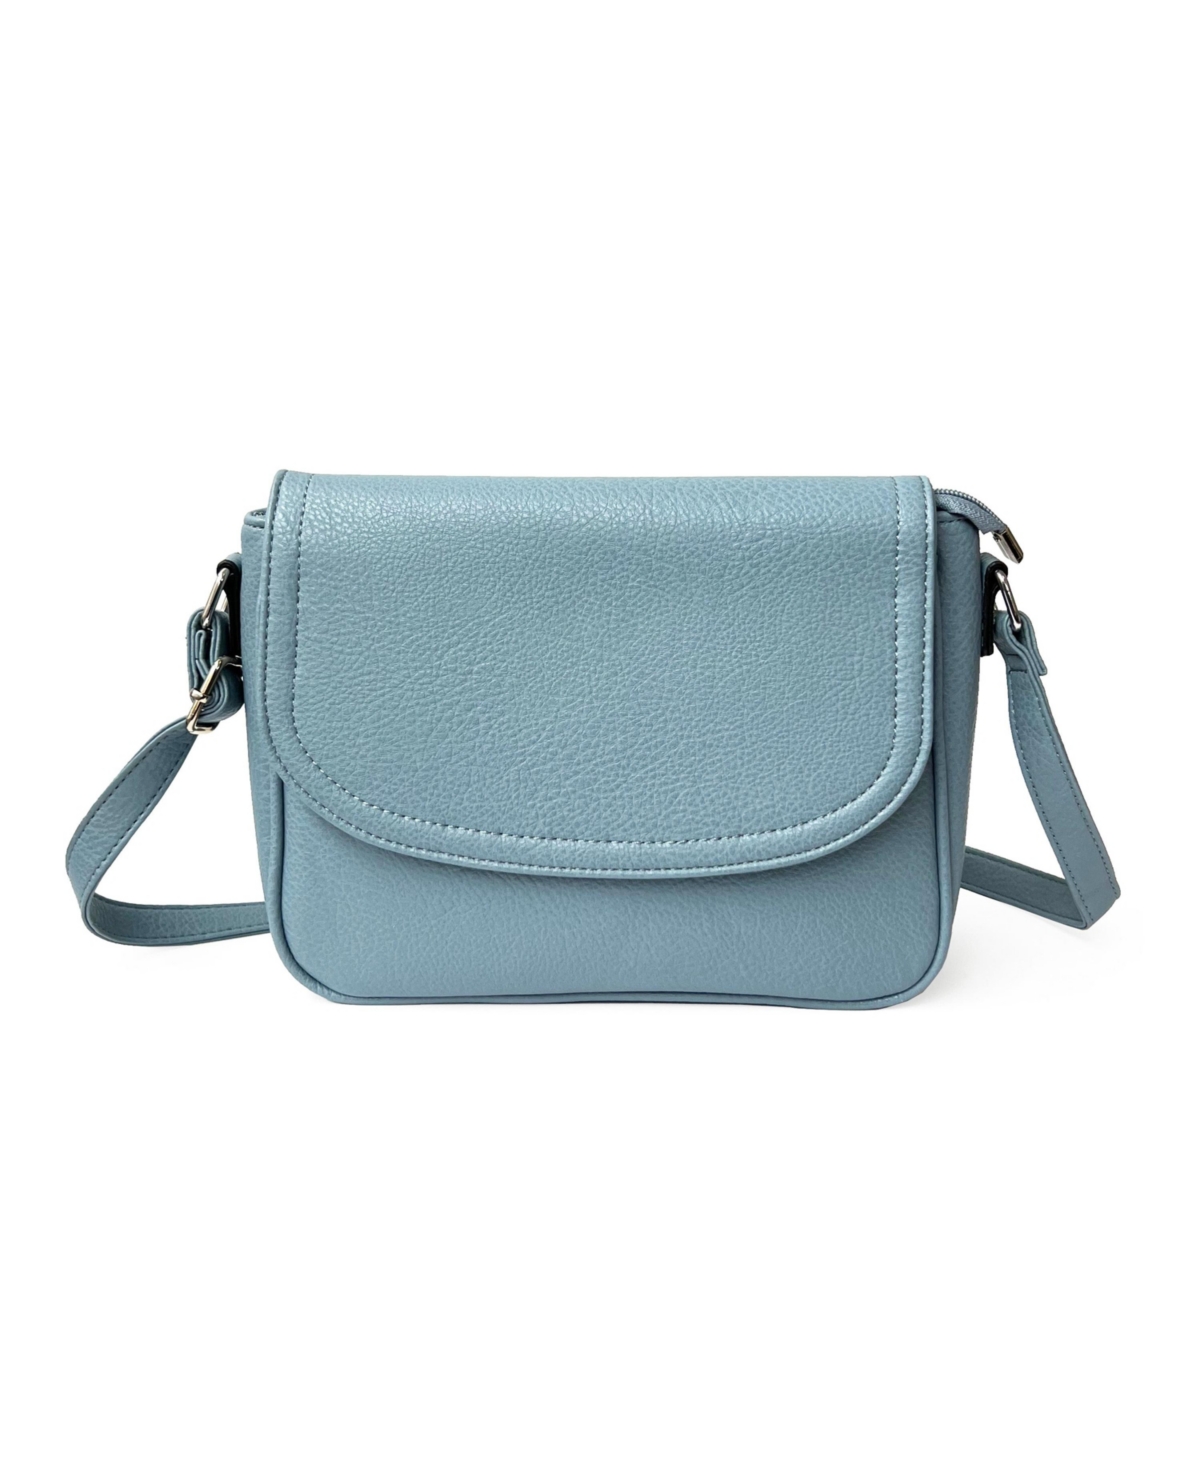 Ladies Crossbody Bag with Front Flap - Powder blue